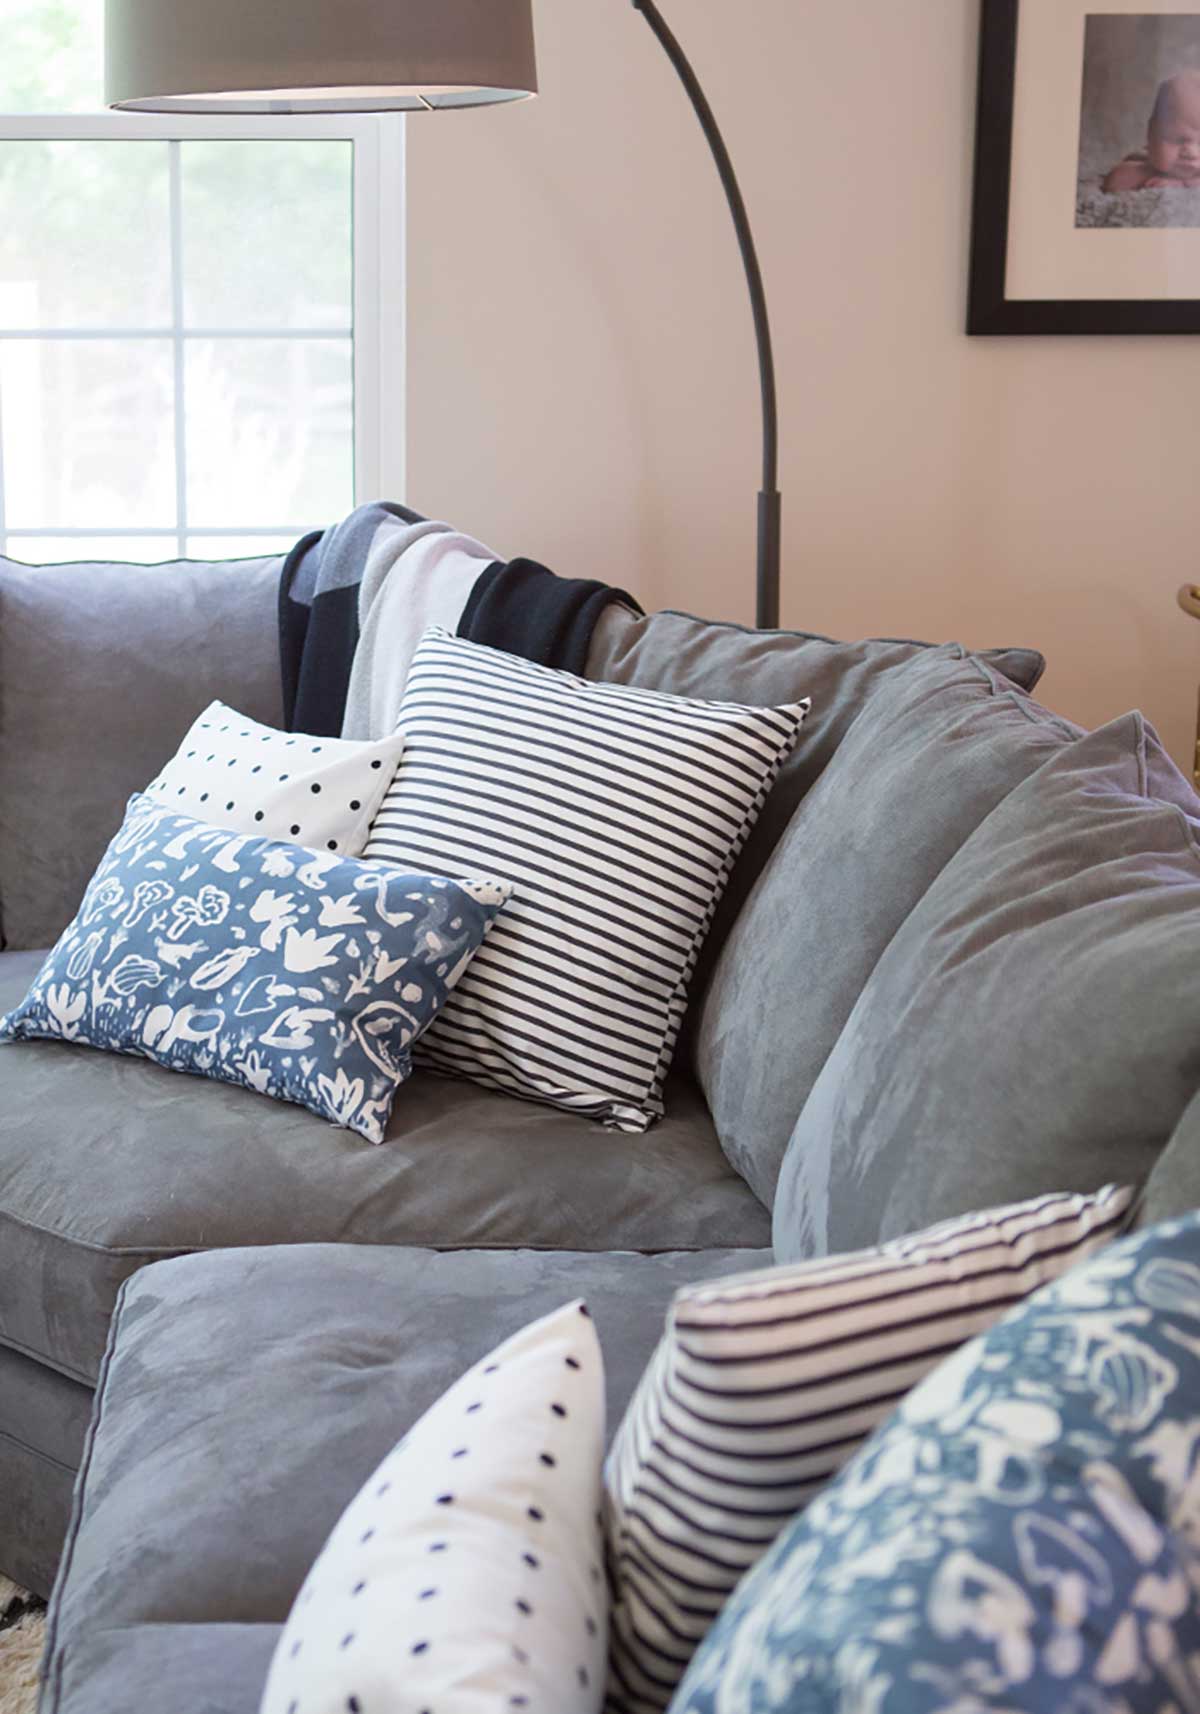 Pillow Styling - mixing and matching patterns that work in my living room